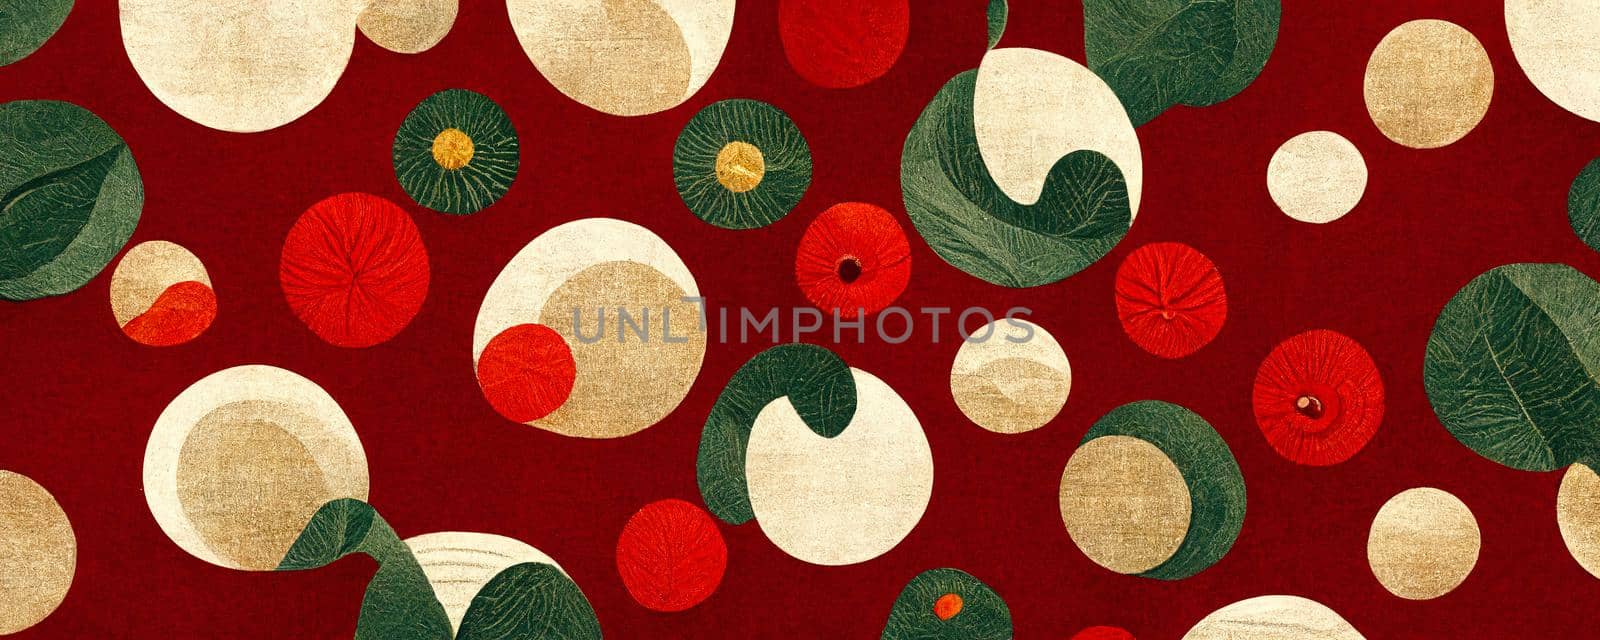 abstract floral pattern on fabric in red-yellow-green hues.